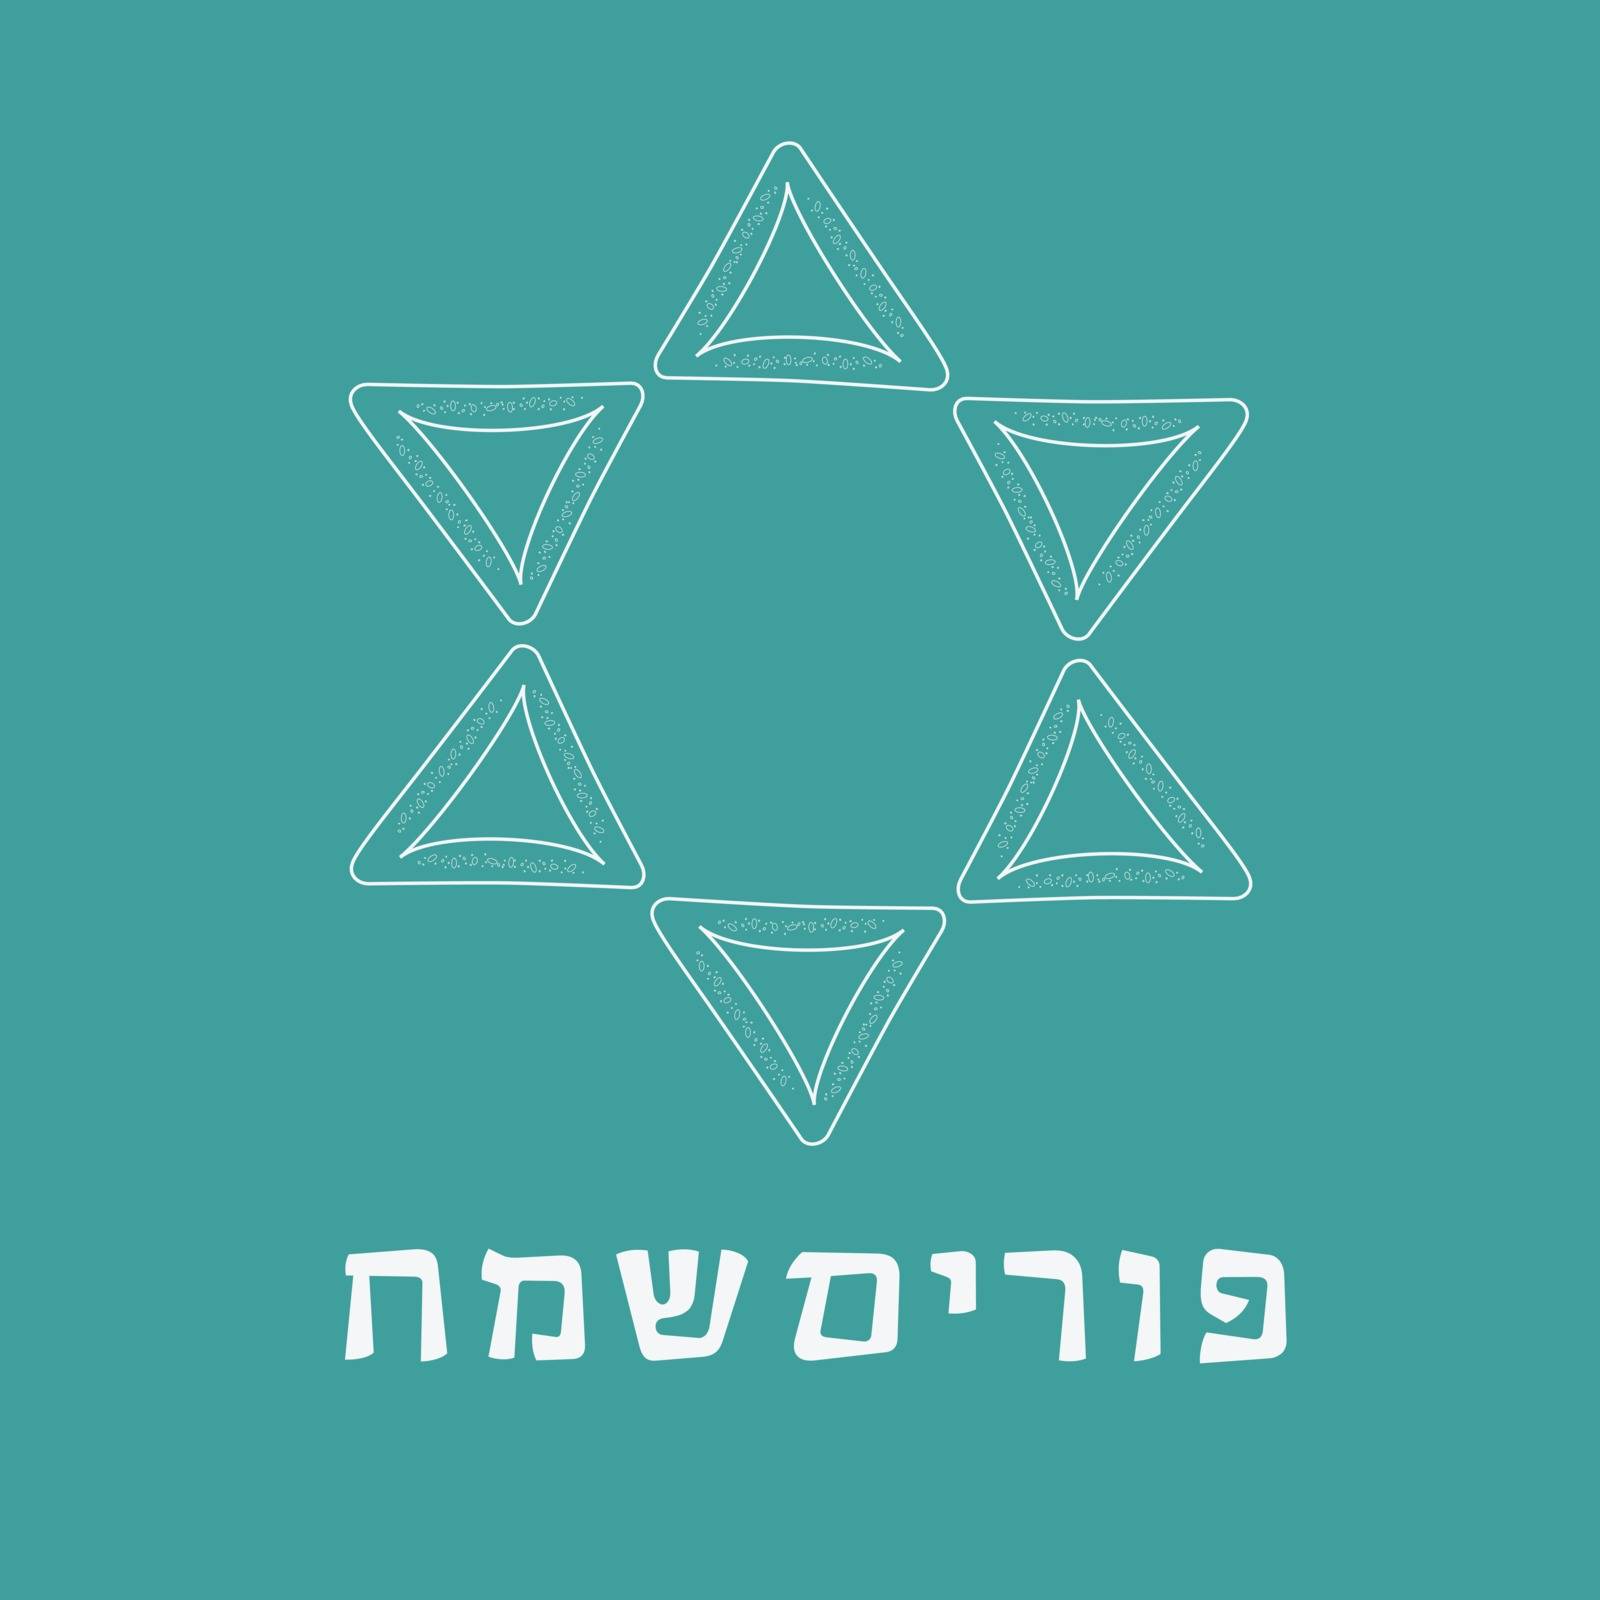 Purim holiday flat design white thin line icons of hamantashs in star of david shape with text in hebrew "Purim Sameach" meaning "Happy Purim". Vector eps10 illustration.
